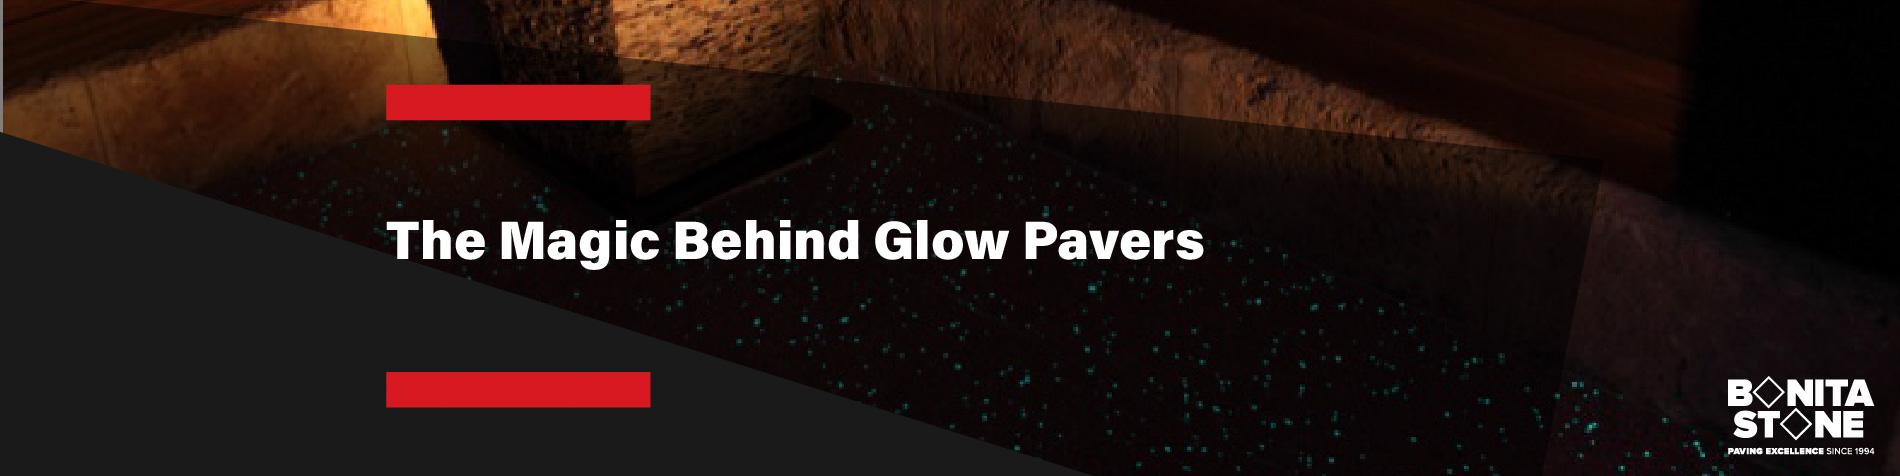 the-magic-behind-glow-pavers-banner